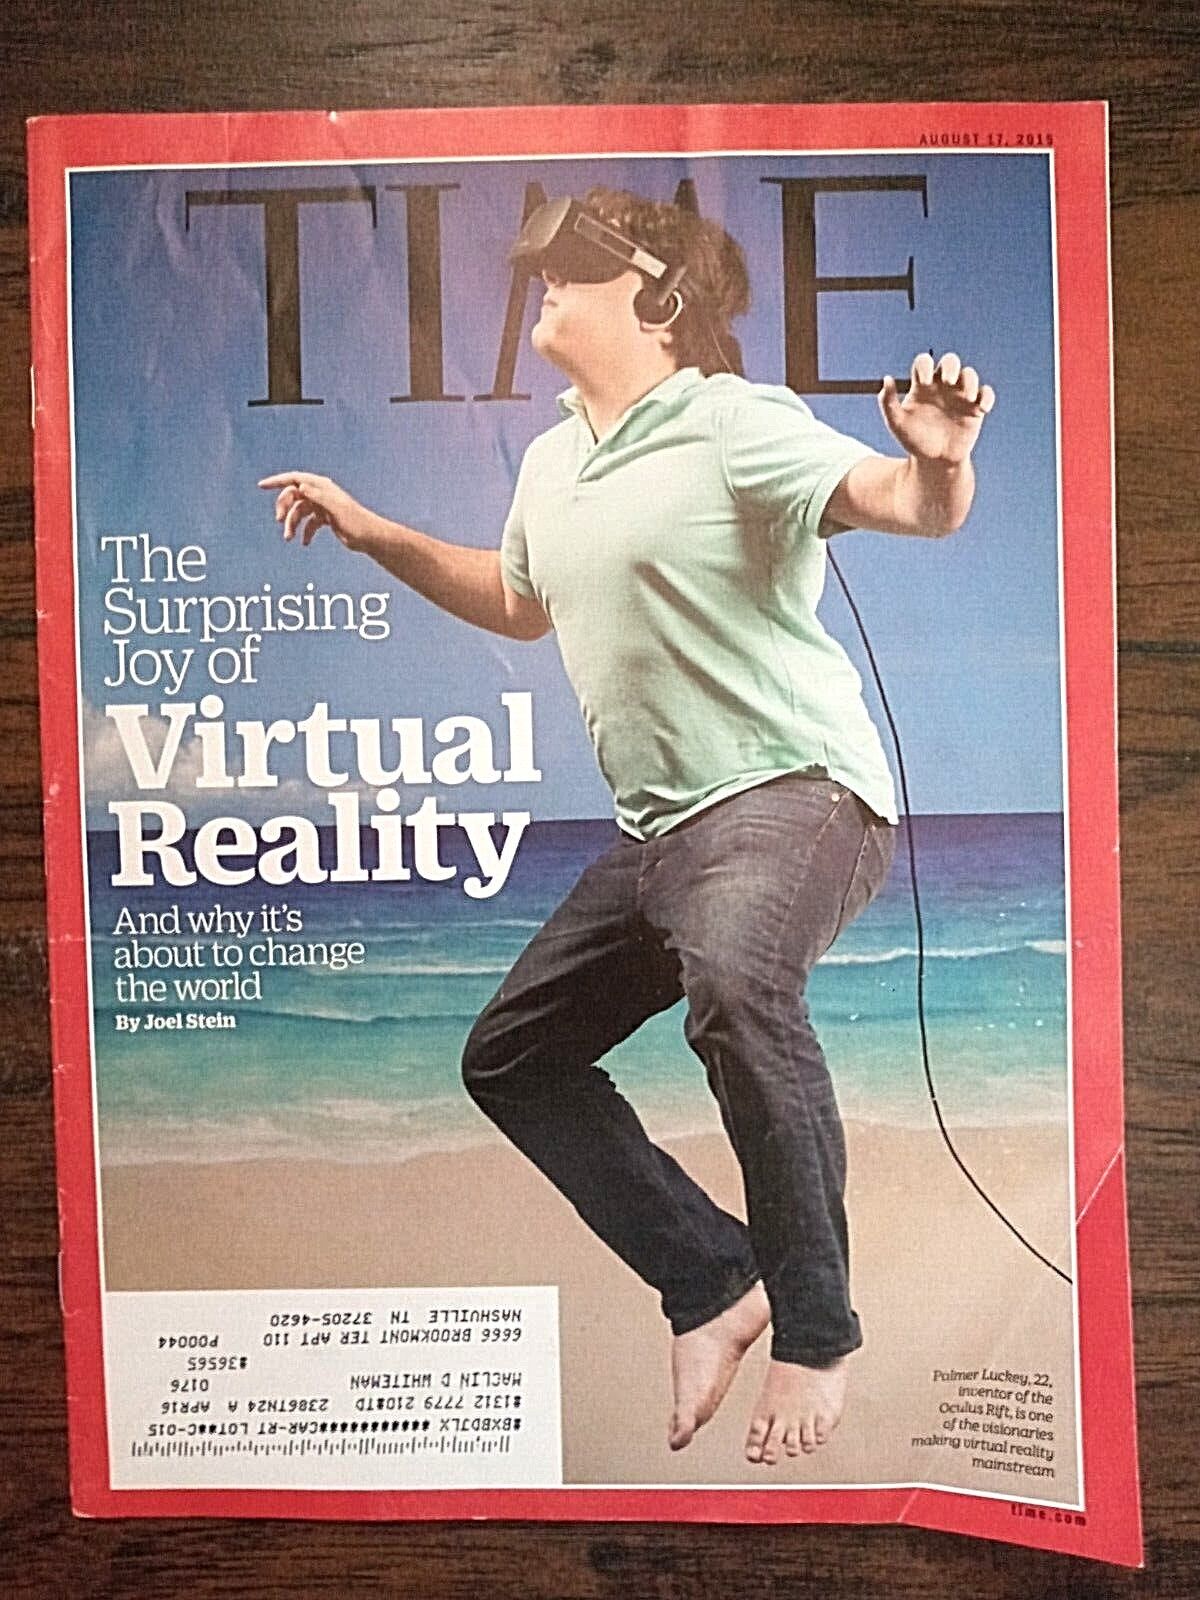 Time Magazine August 17, 2015- The Surprising Joy Of Virtual Reality